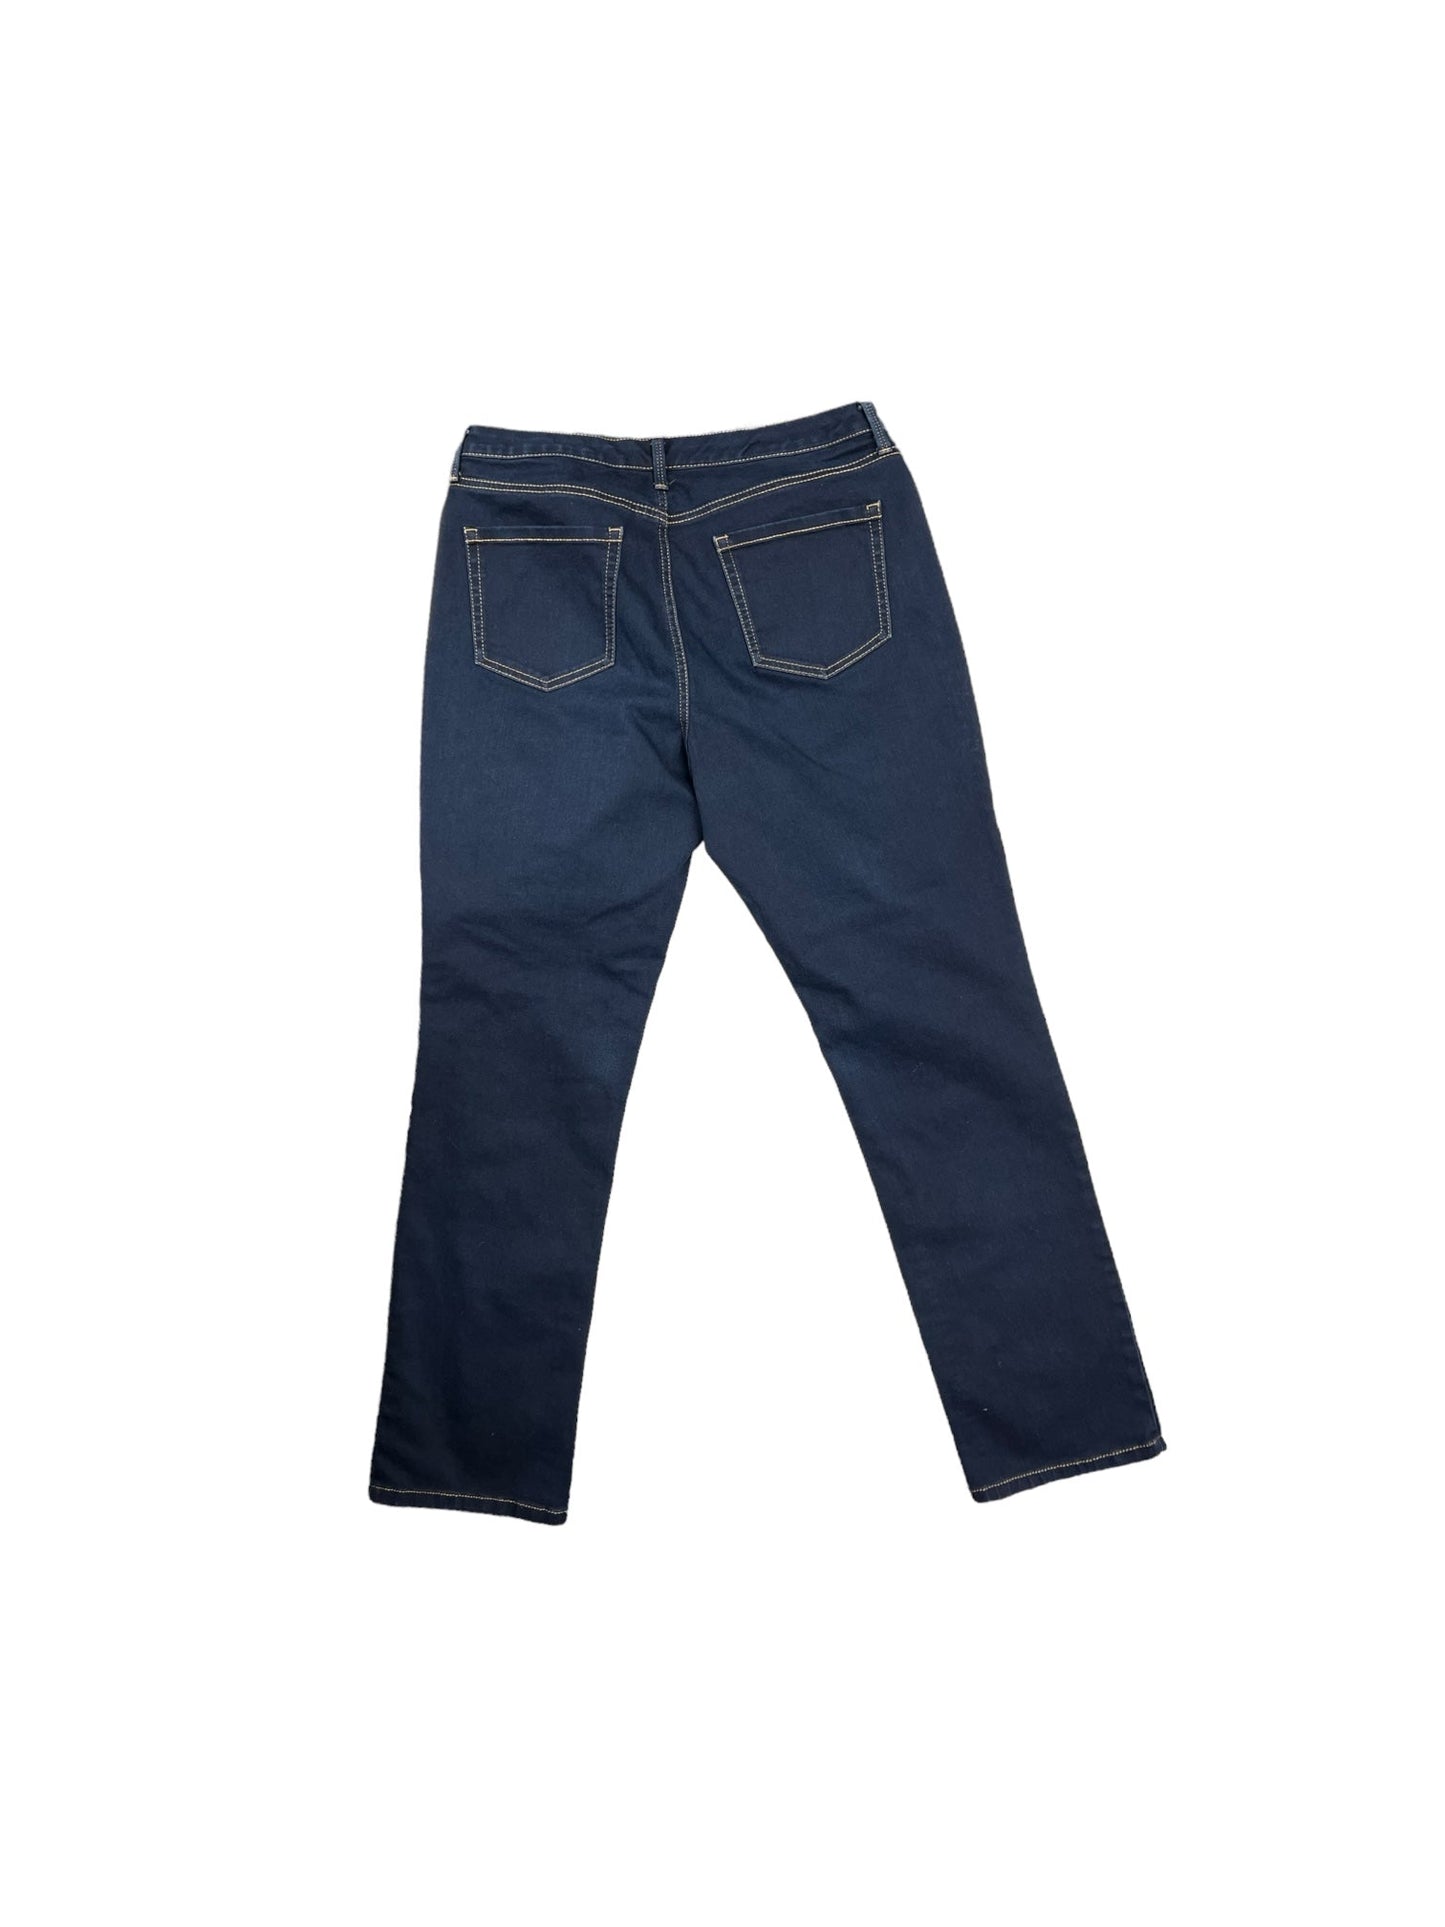 Jeans Straight By Charter Club  Size: 14